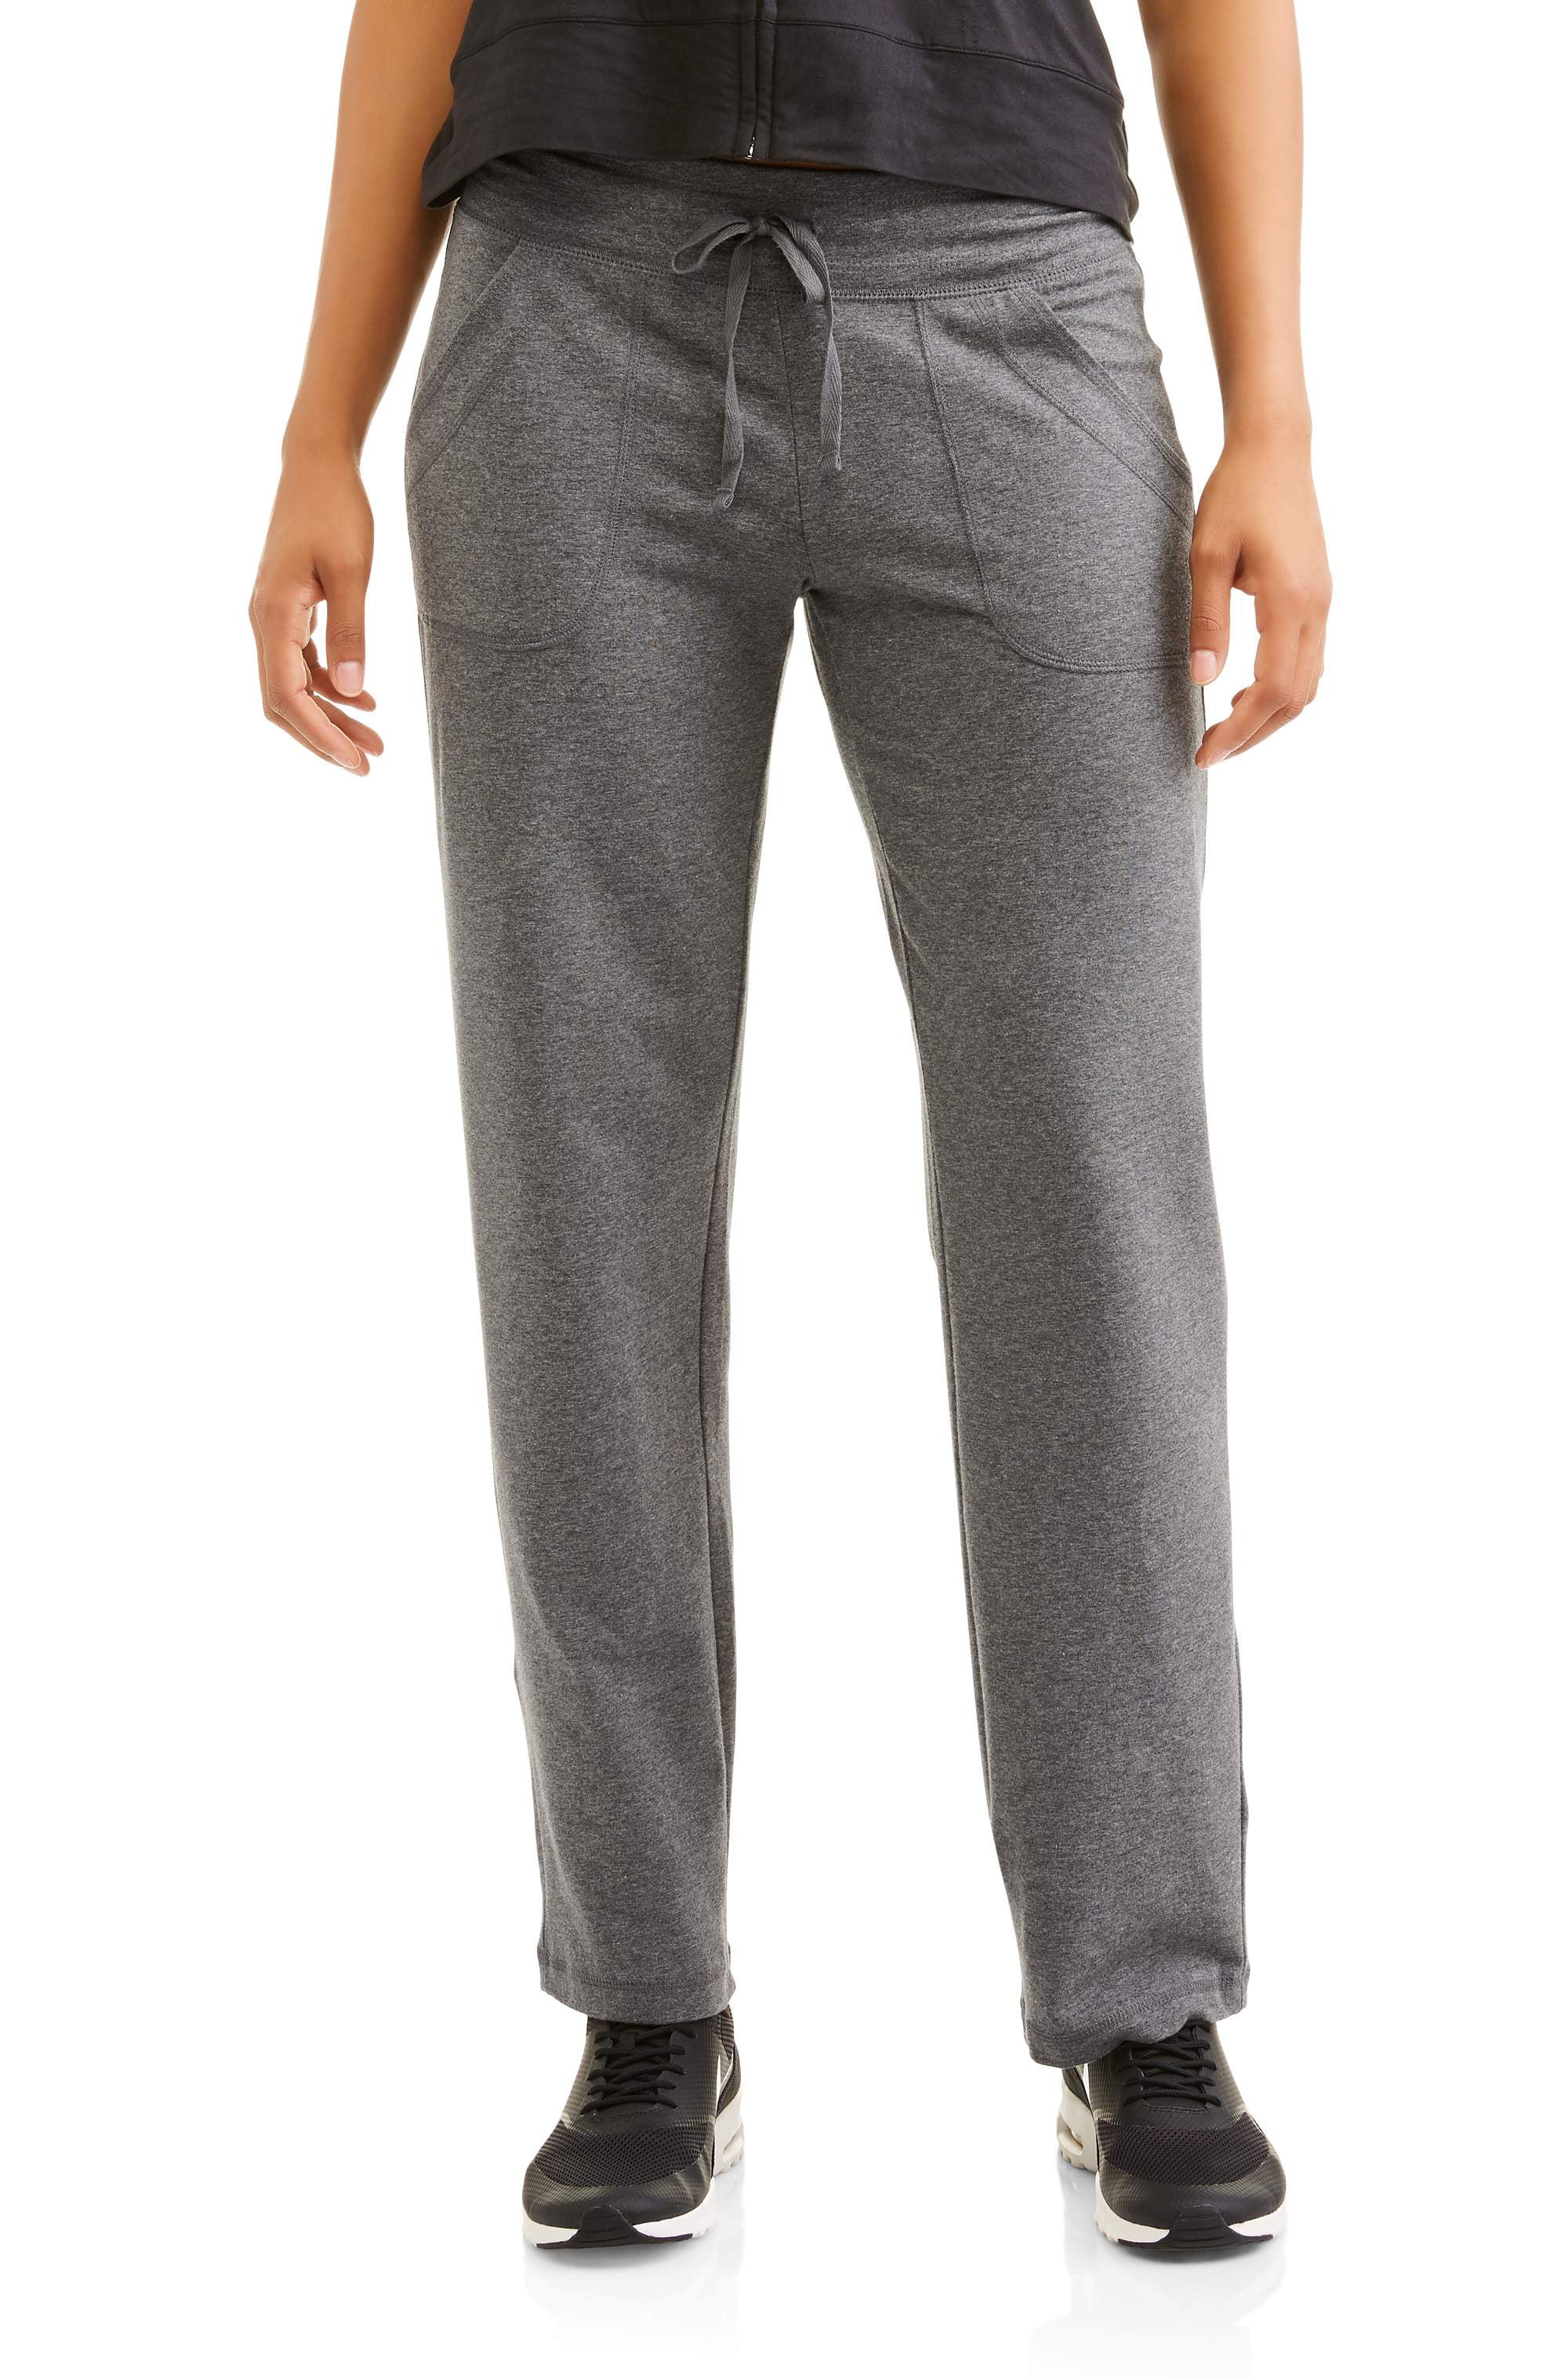 Athletic Works Women's Athleisure Knit Pant Available in Regular and ...